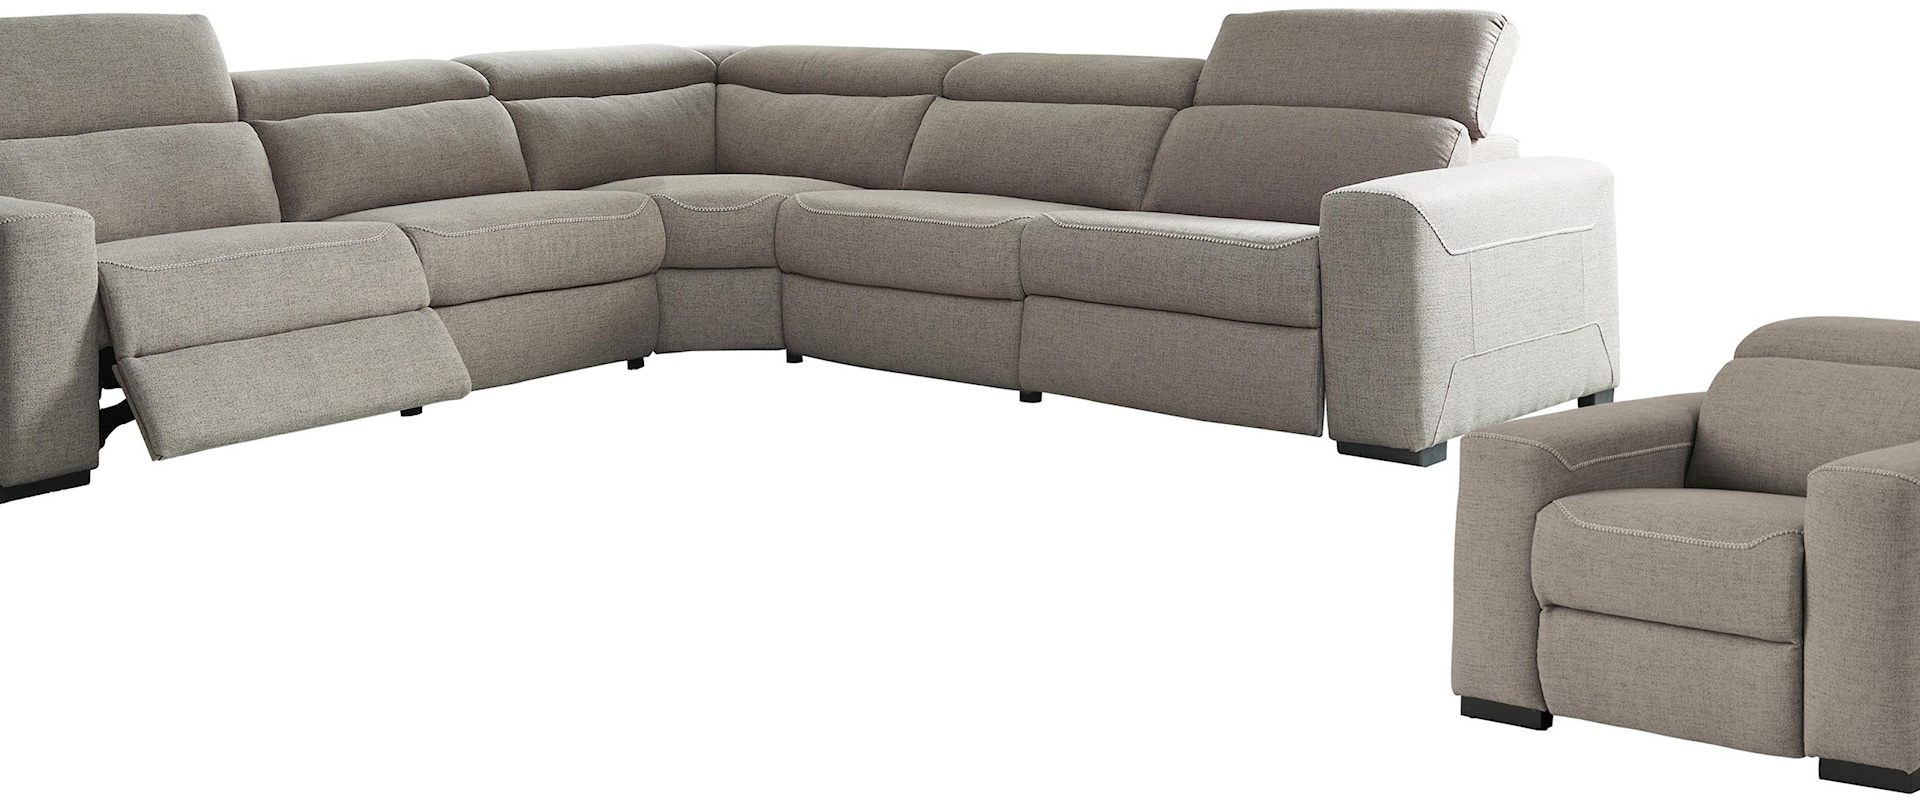 5 Piece Power Reclining Sectional Sofa and Power Recliner set